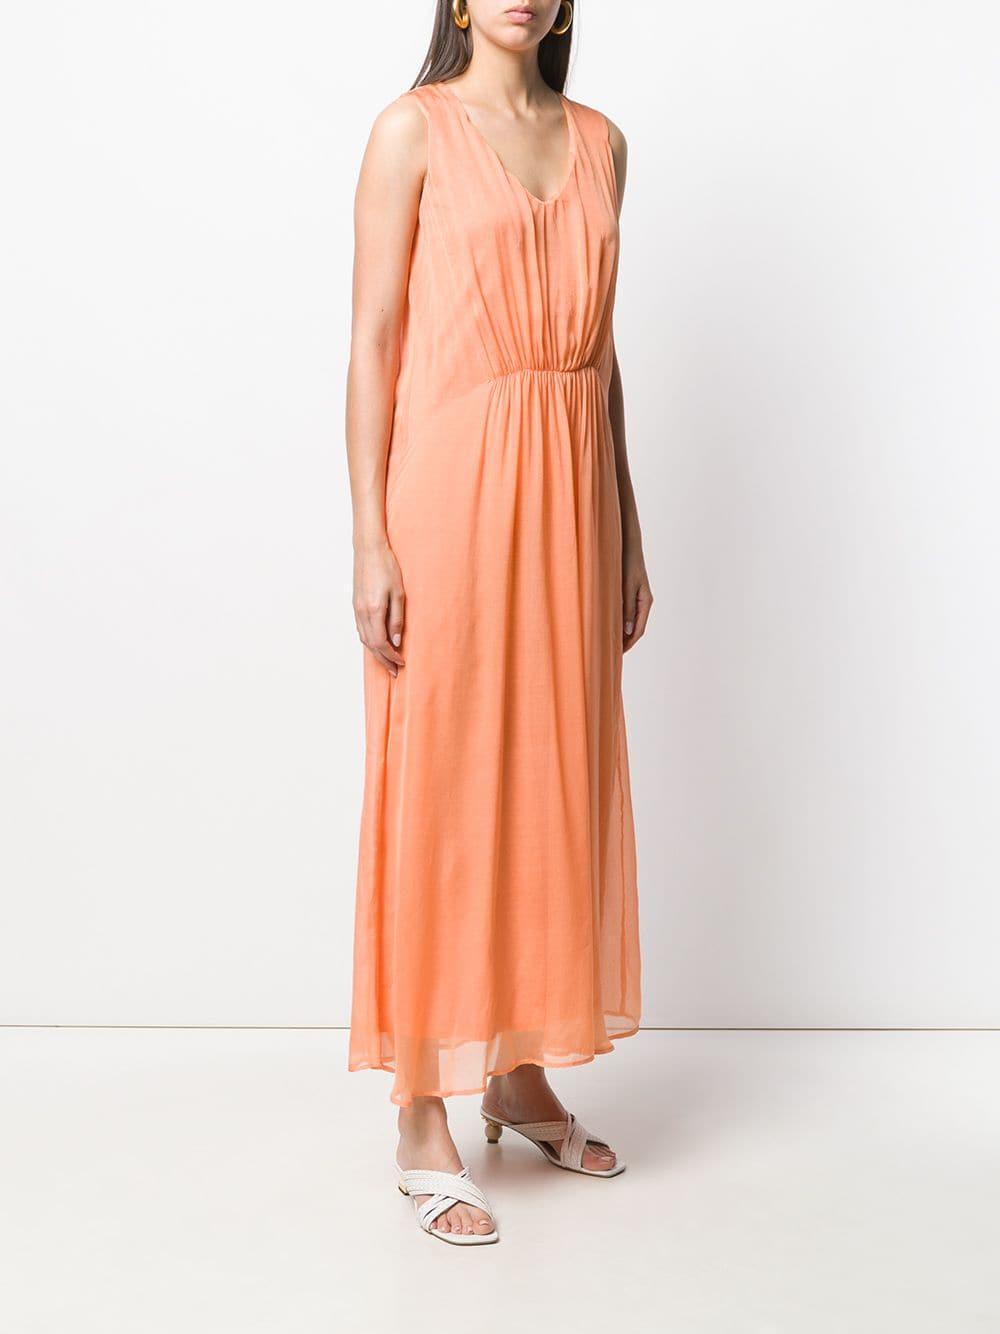 120% Lino Long Sleeveless Ruched Dress in Orange - Lyst